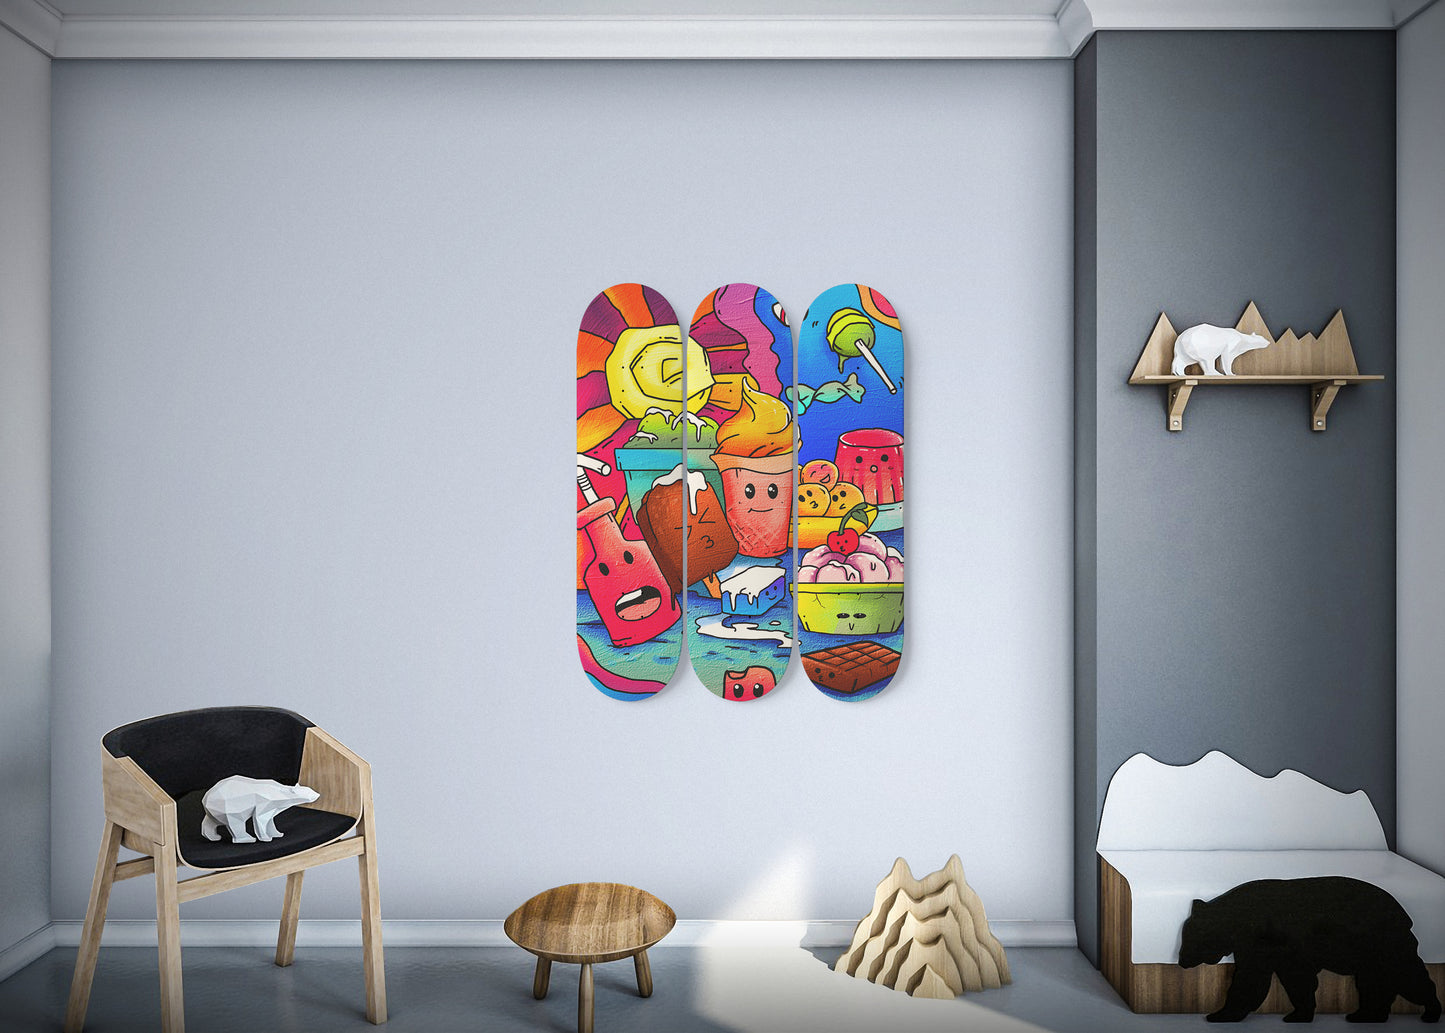 Chilling Sweets Doodle - 3 Piece Skateboard Wall Art